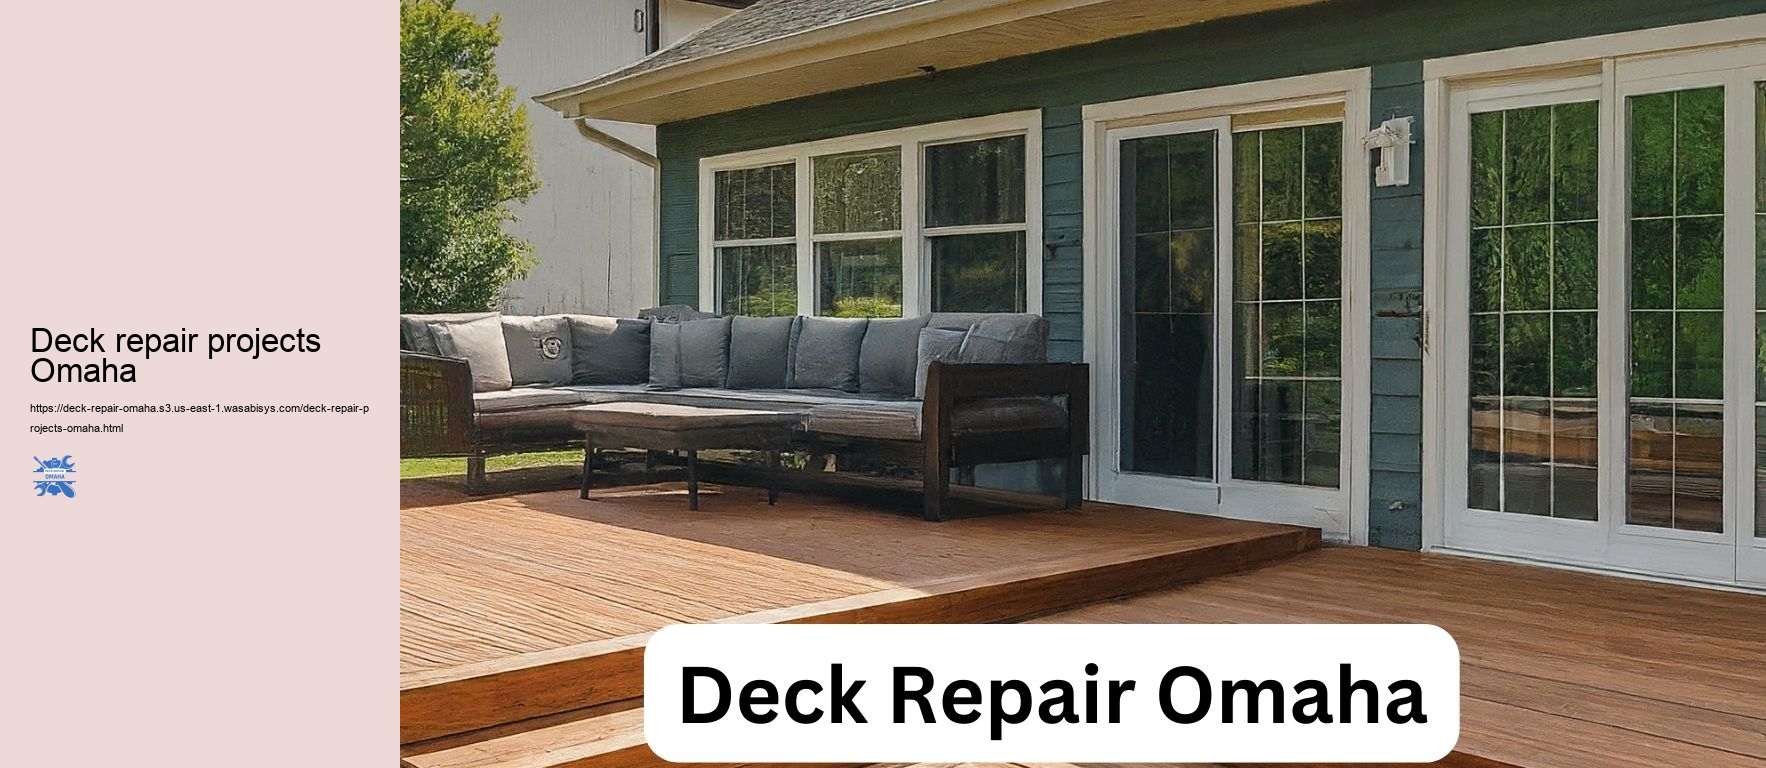 Deck repair projects Omaha